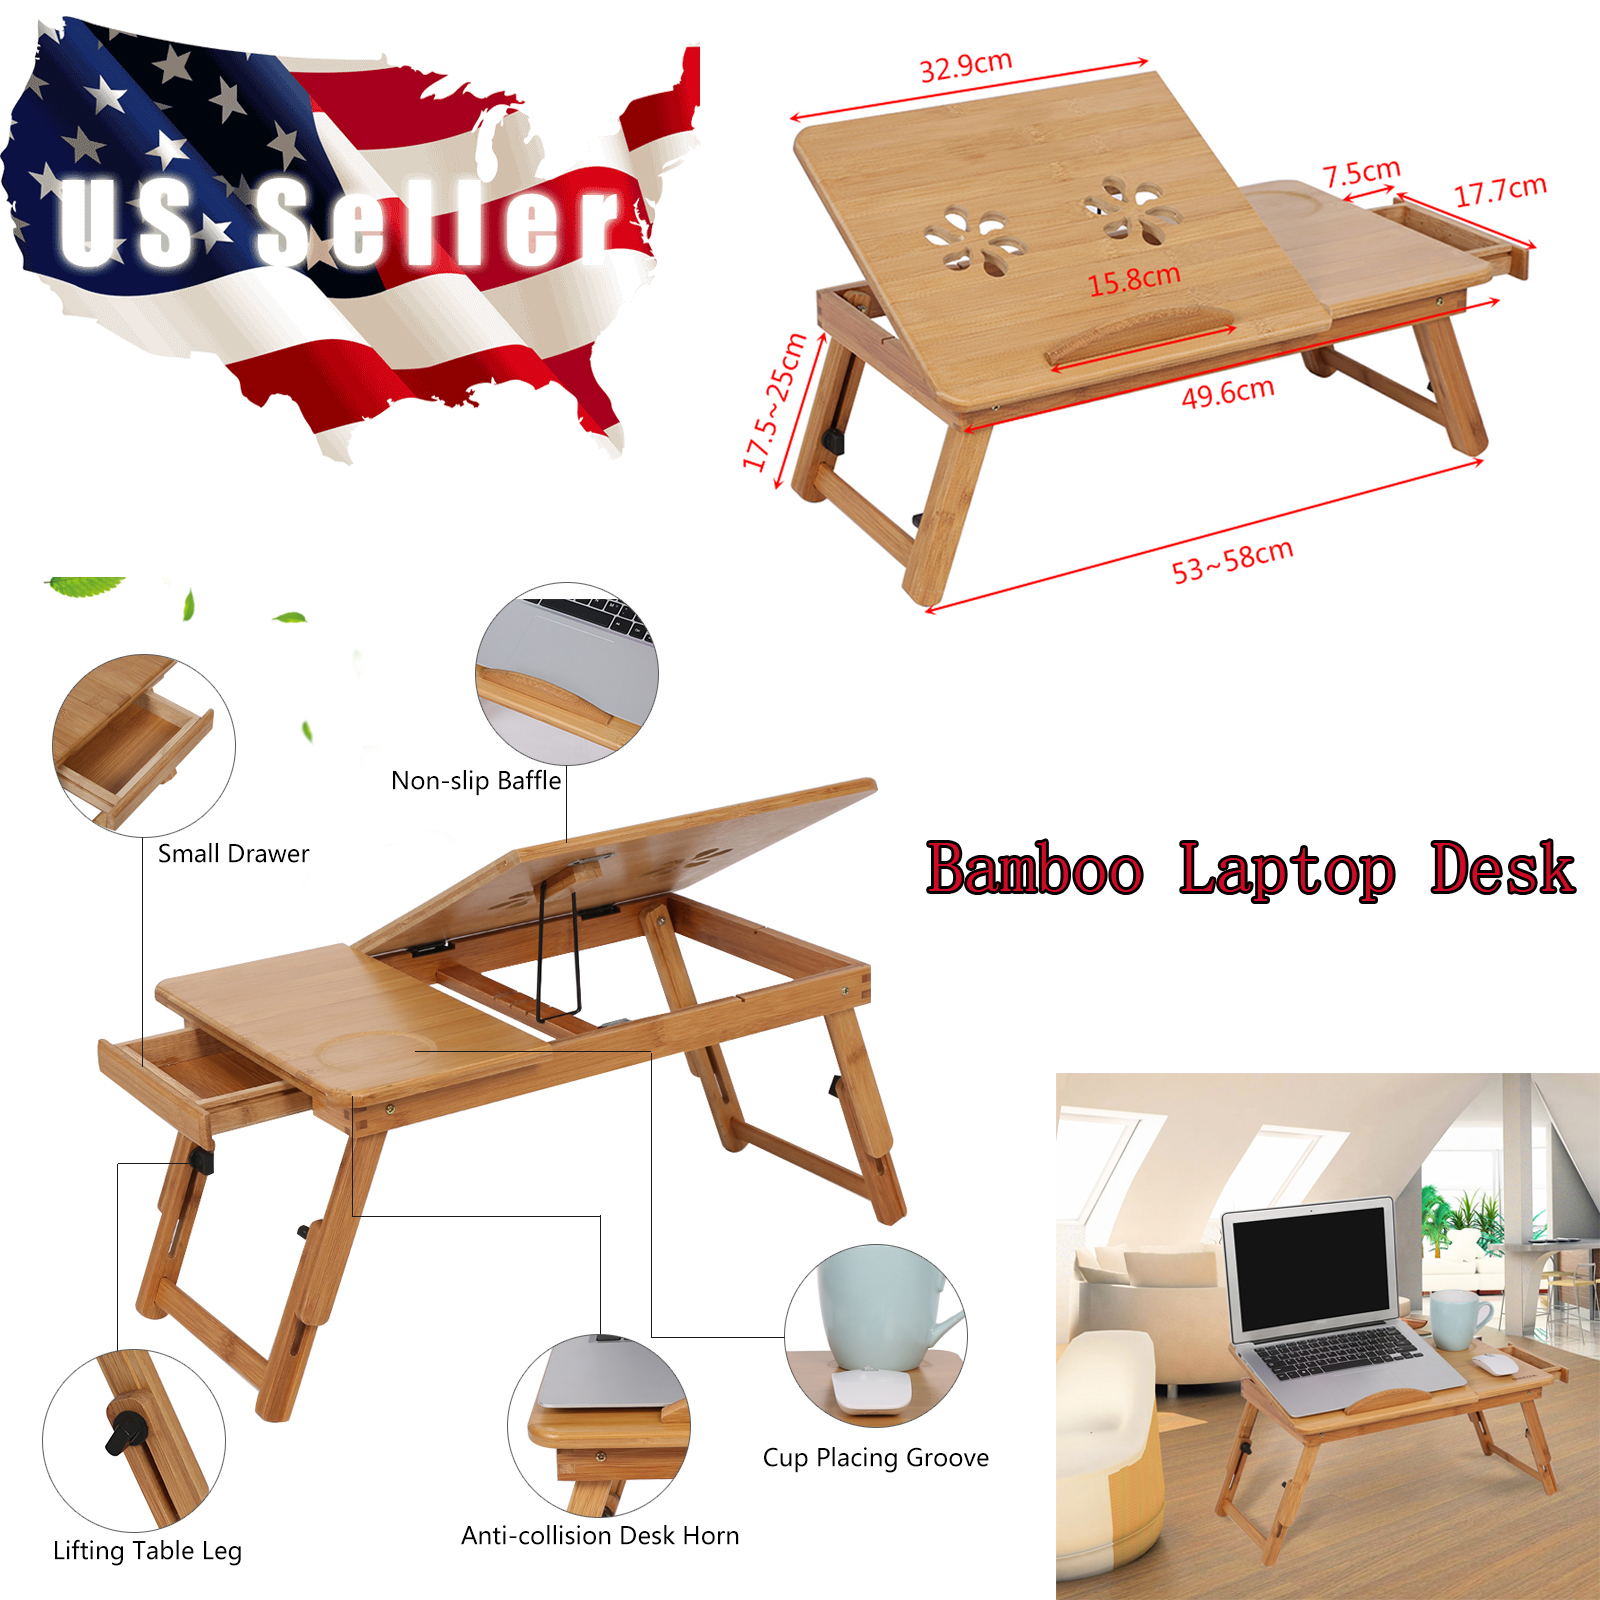 Adjustable Bamboo Rack Shelf Dormitory Bed Lap Desk Two Flowers Book Reading Tray Stand Retractable Laptop Desk Computer Desk